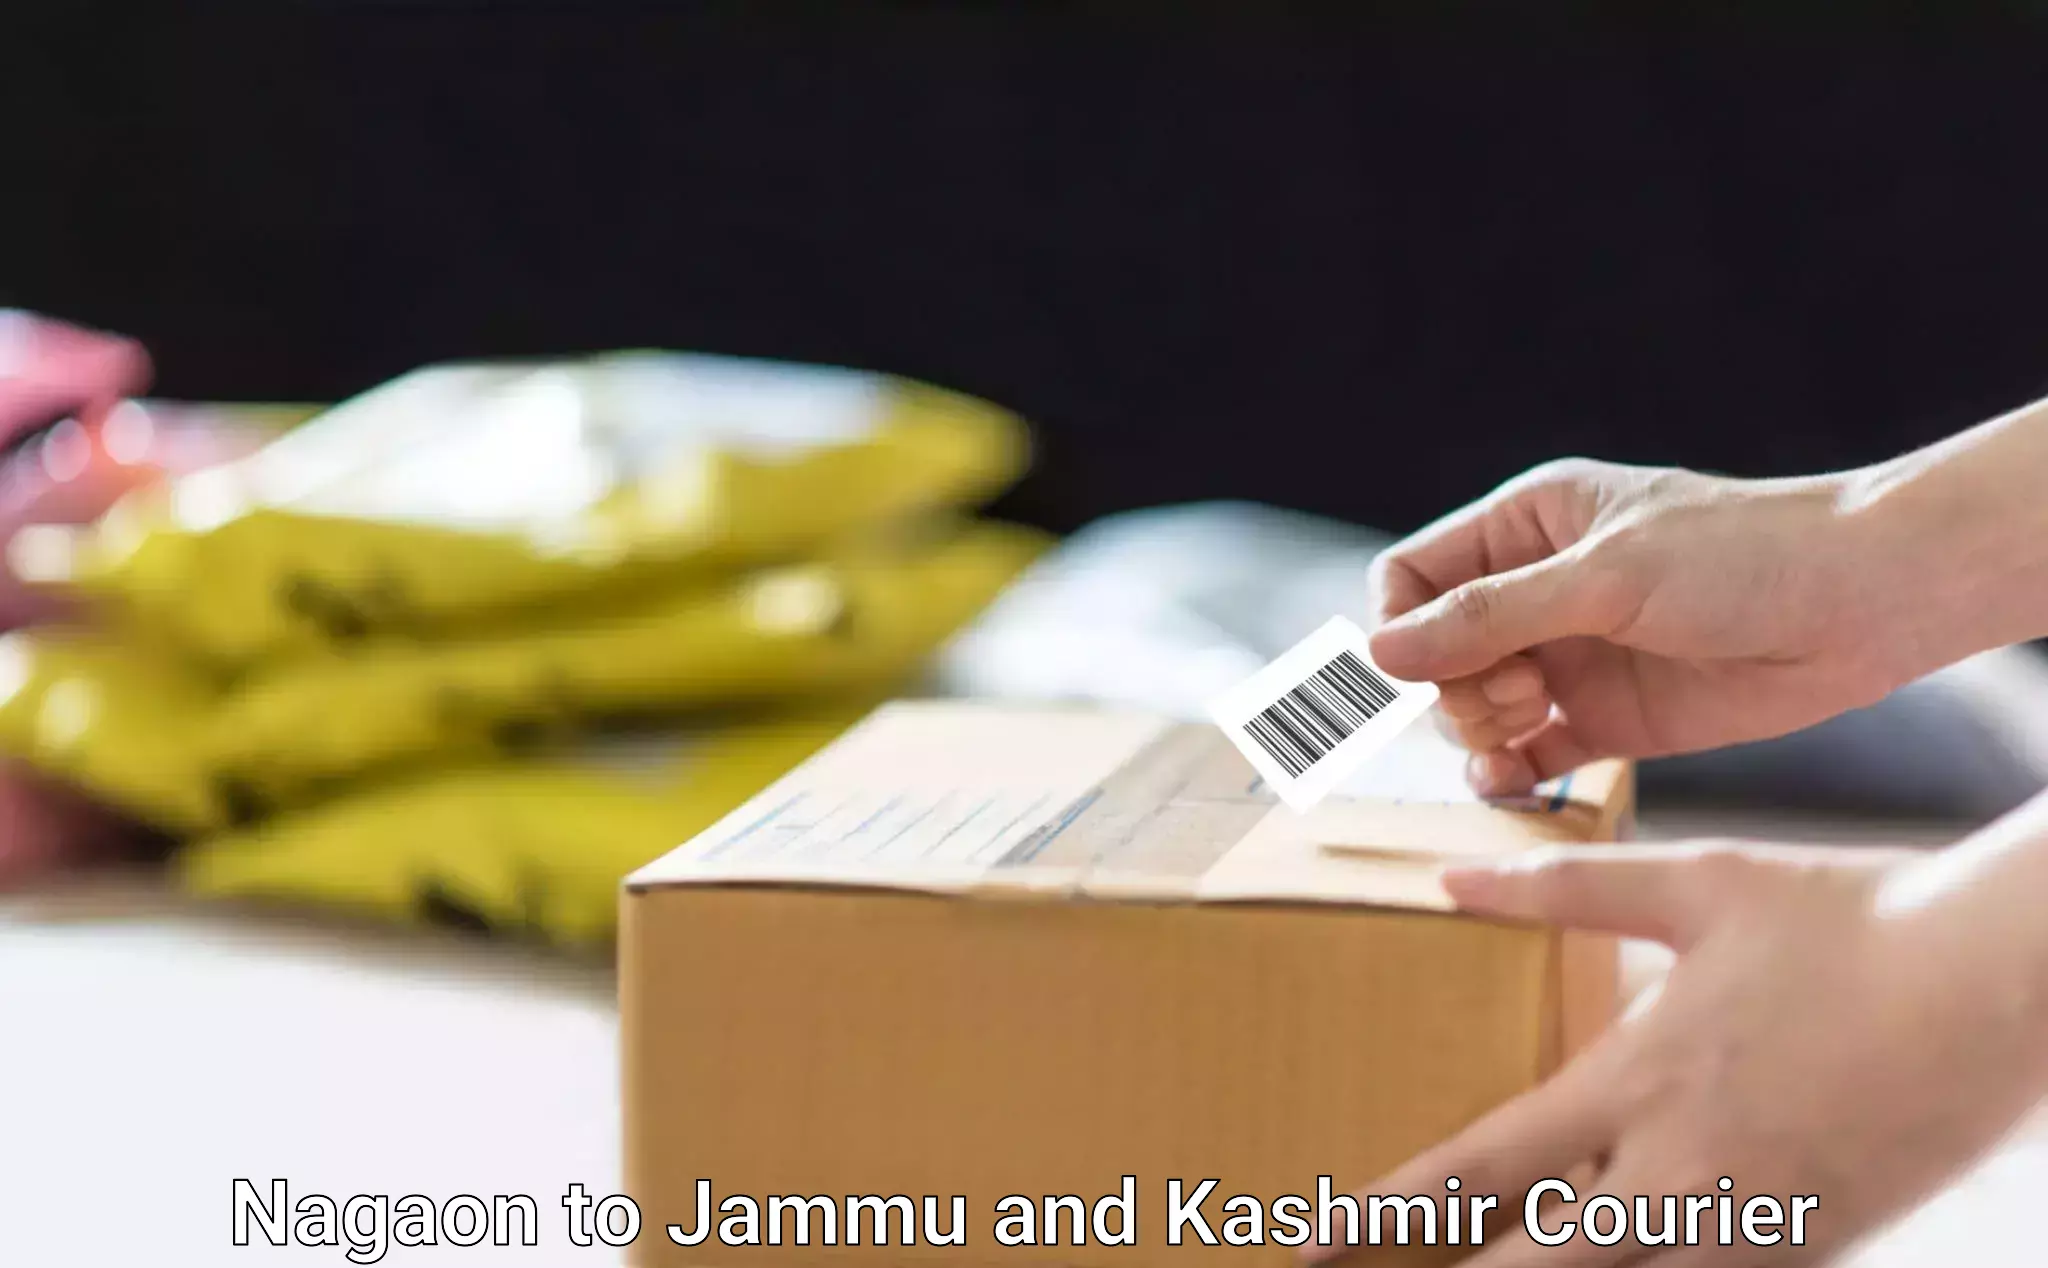 Express package delivery Nagaon to Jammu and Kashmir